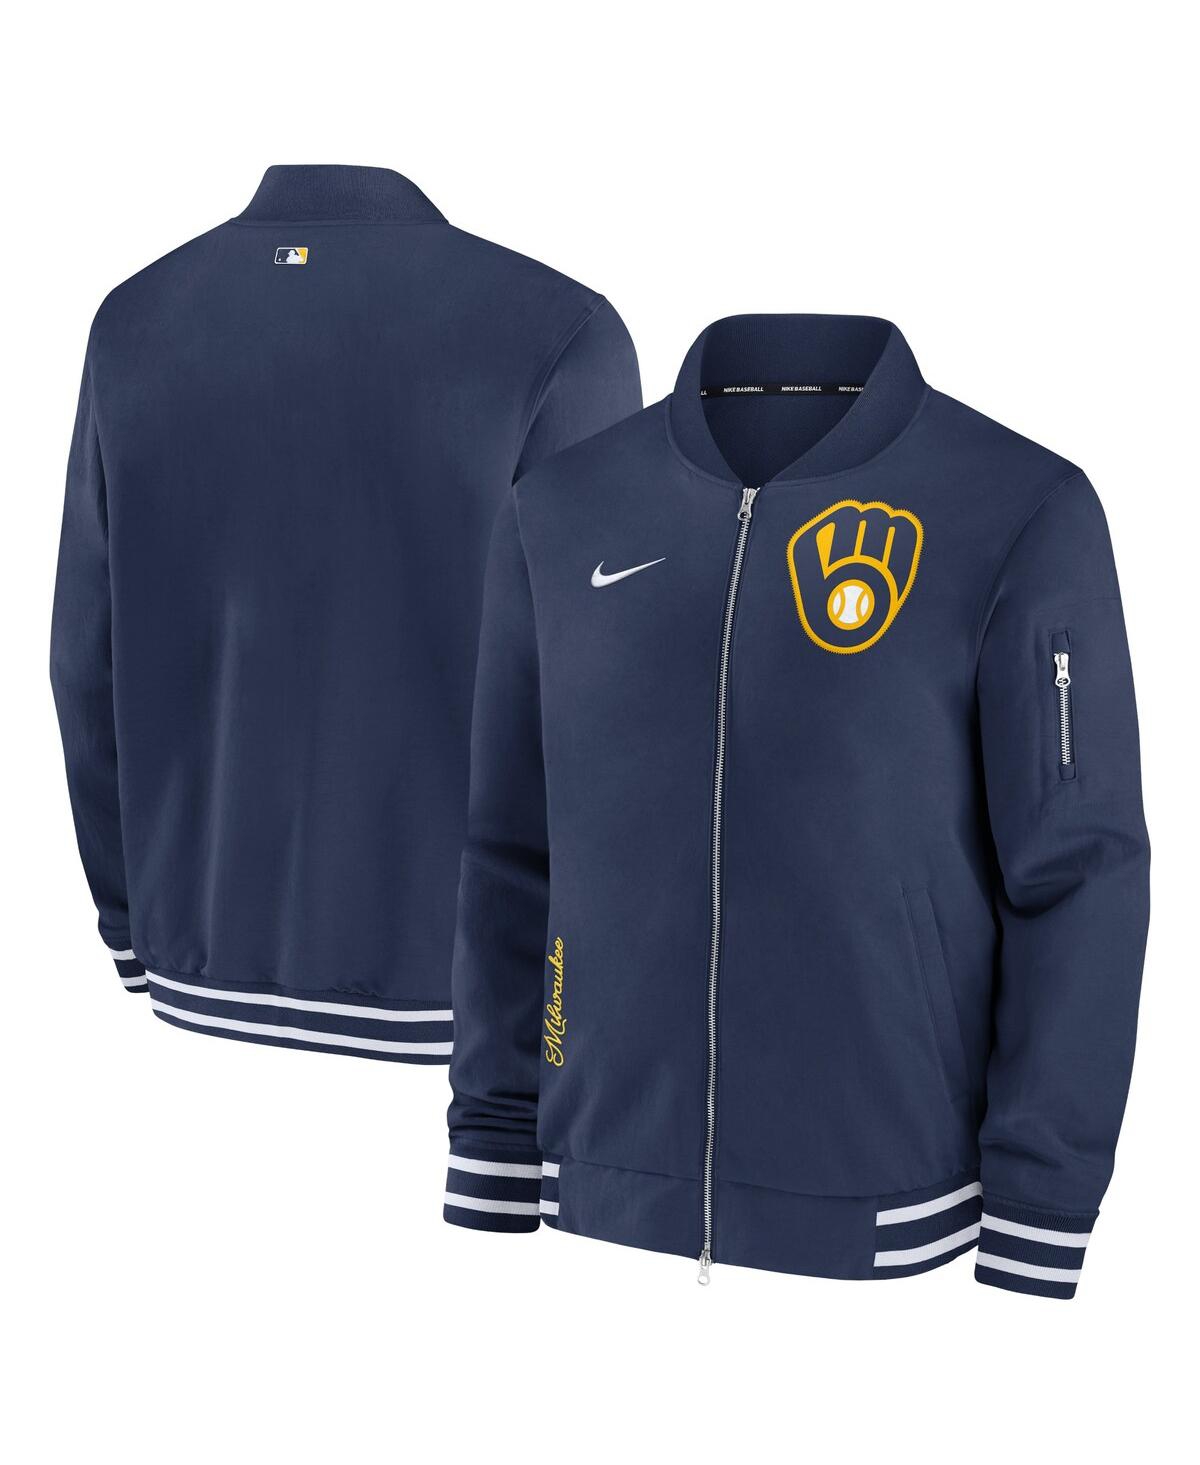 Men's Nike Navy Milwaukee Brewers Authentic Collection Full-Zip Bomber Jacket - Navy